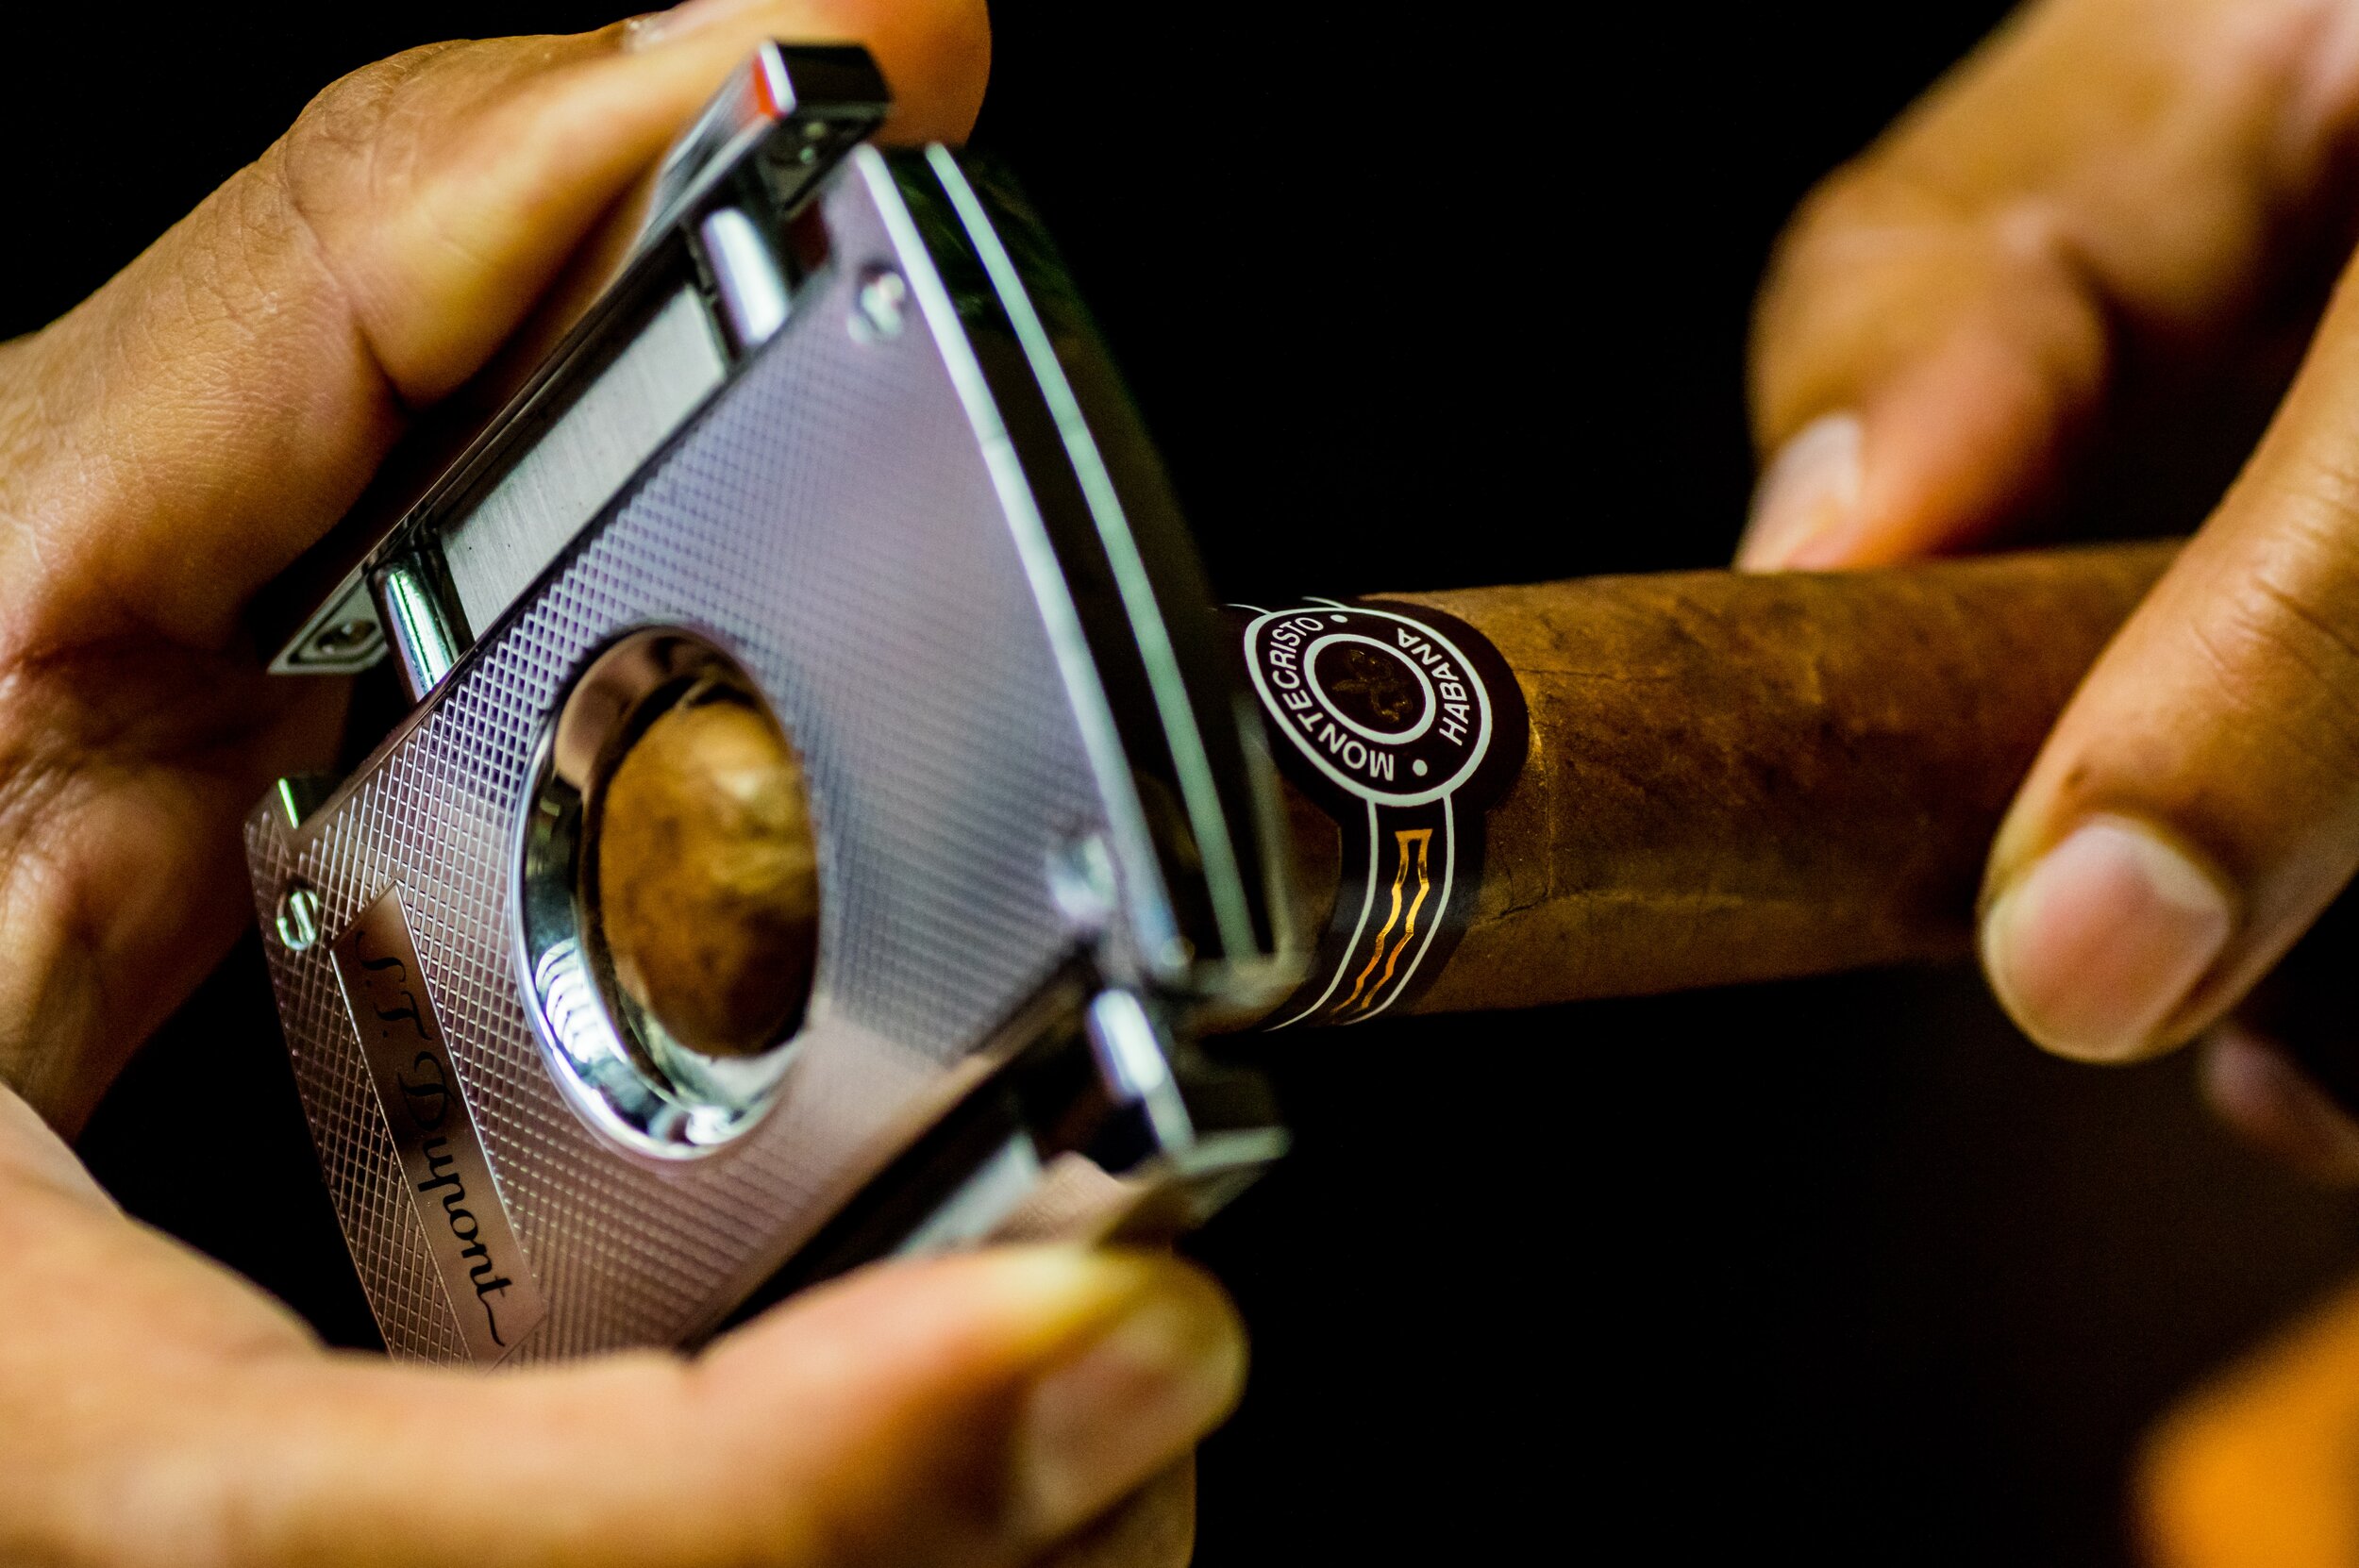  TIME TO UNWIND? WE’LL BRING THE CIGARS. 